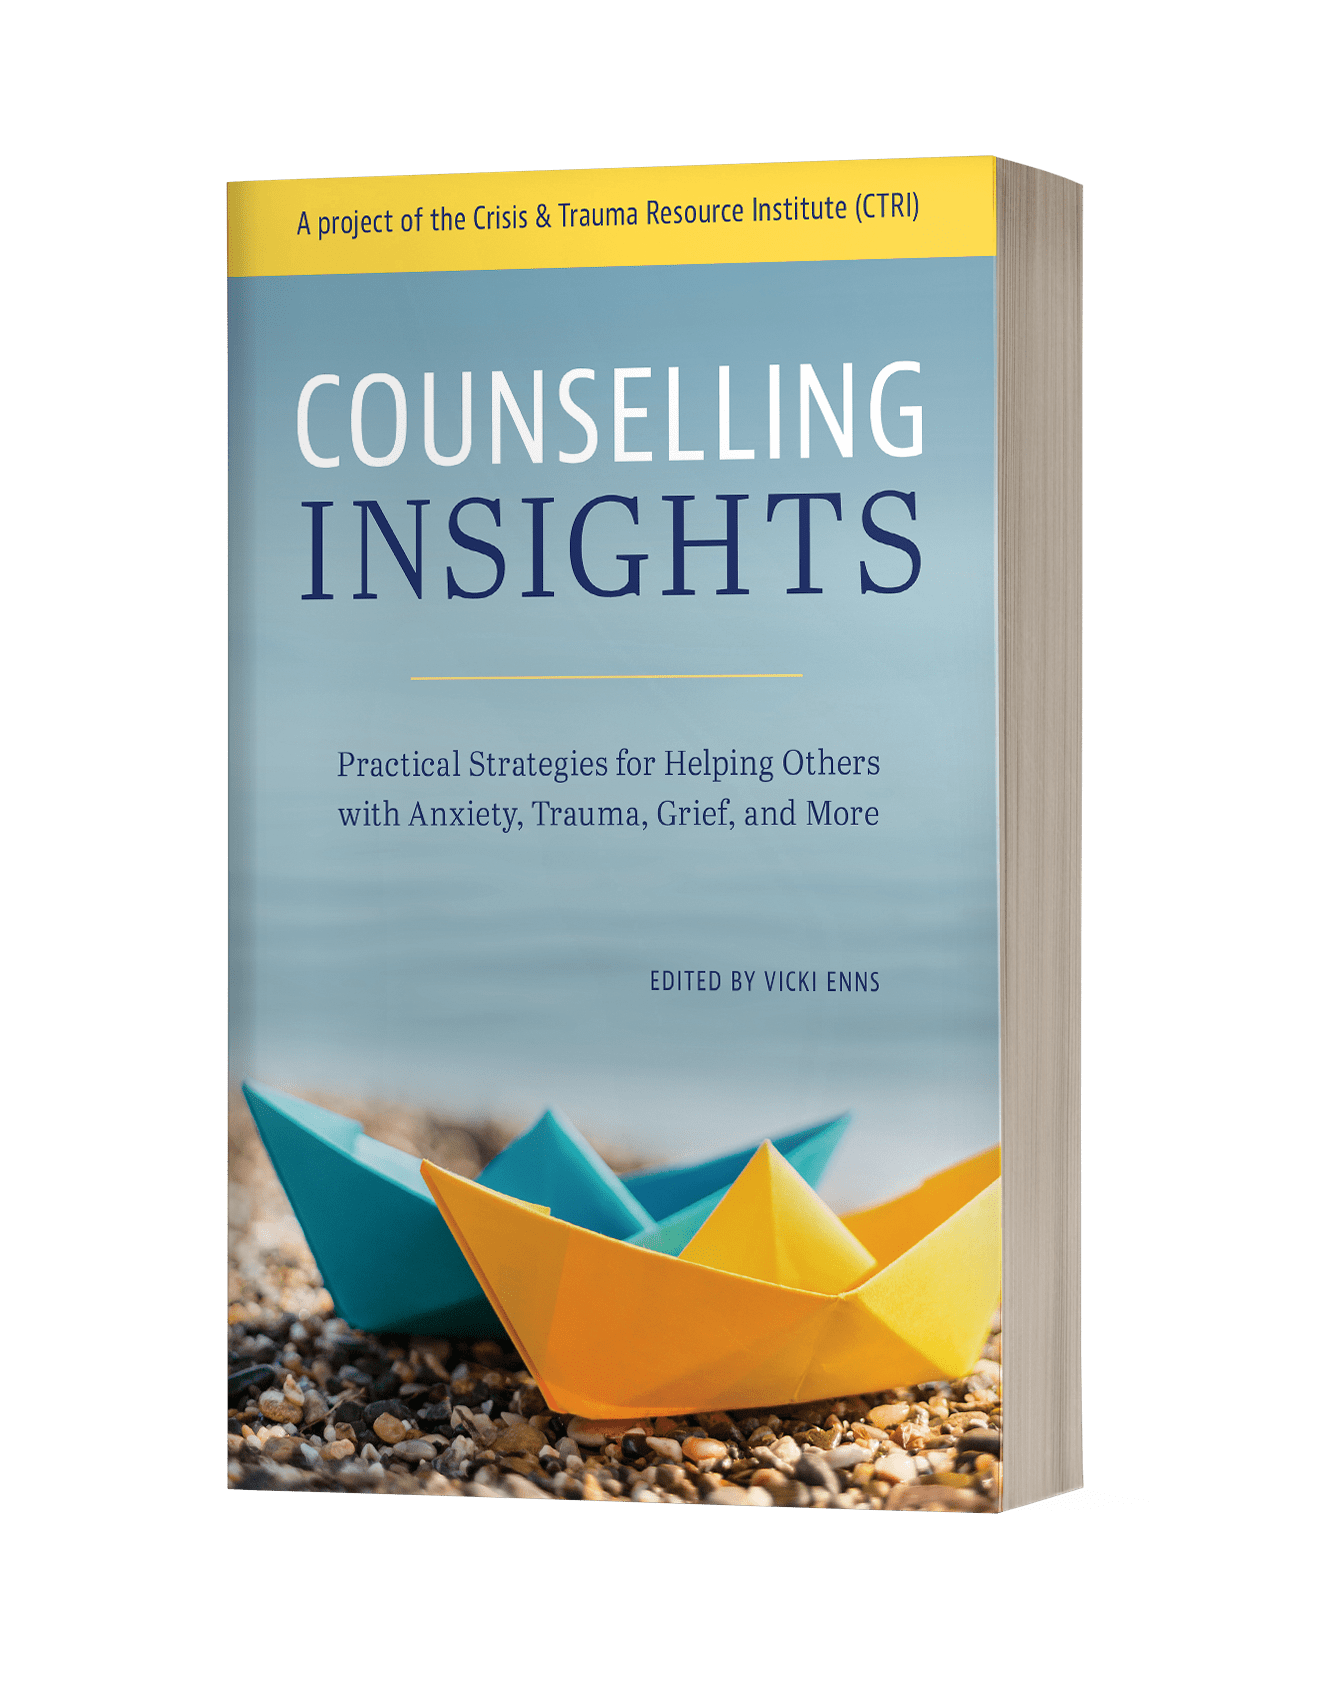 Counselling Insights Book Cover